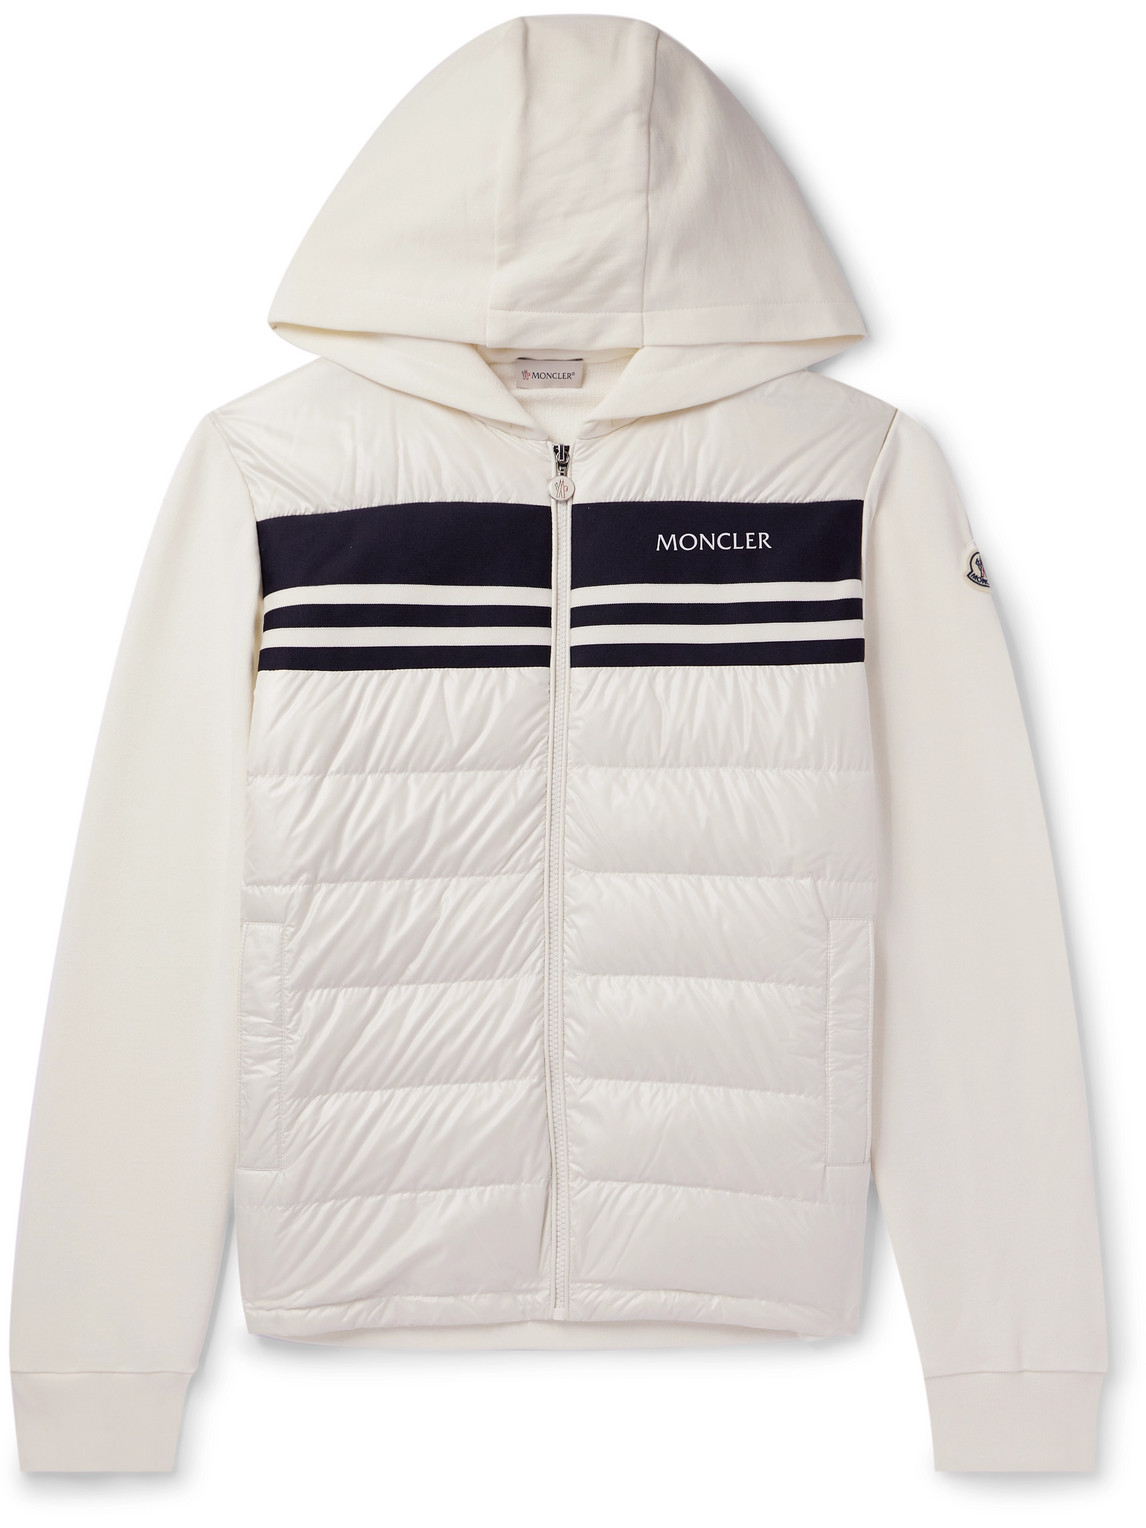 Moncler - Slim-Fit Cotton-Jersey and Quilted Shell Down Zip-Up Hoodie - Men - White - M von Moncler